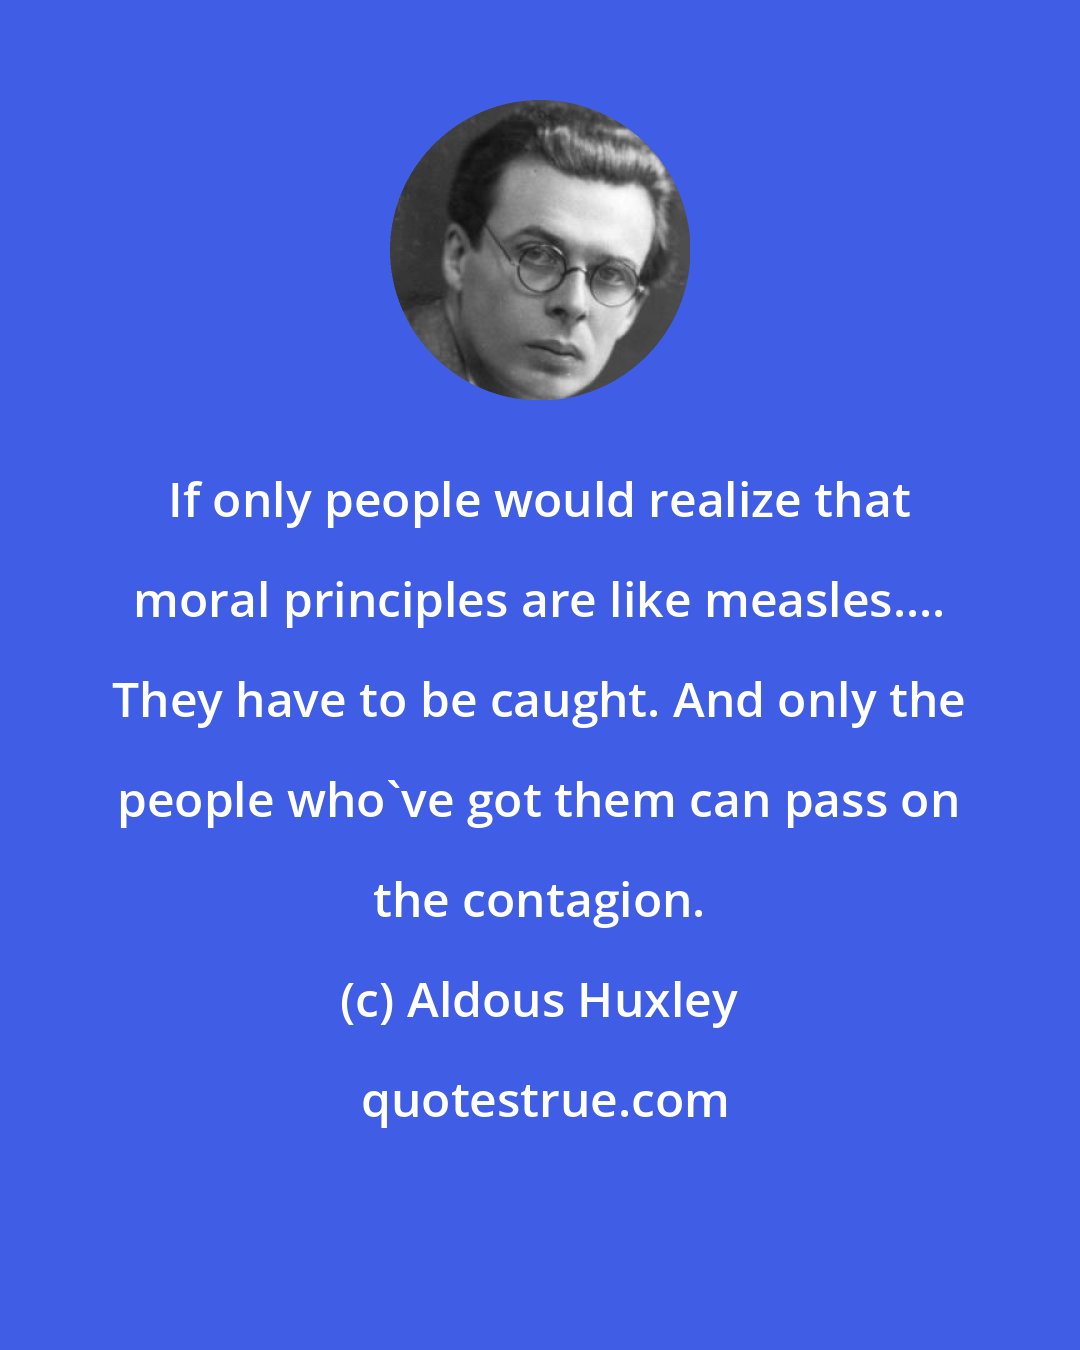 Aldous Huxley: If only people would realize that moral principles are like measles.... They have to be caught. And only the people who've got them can pass on the contagion.